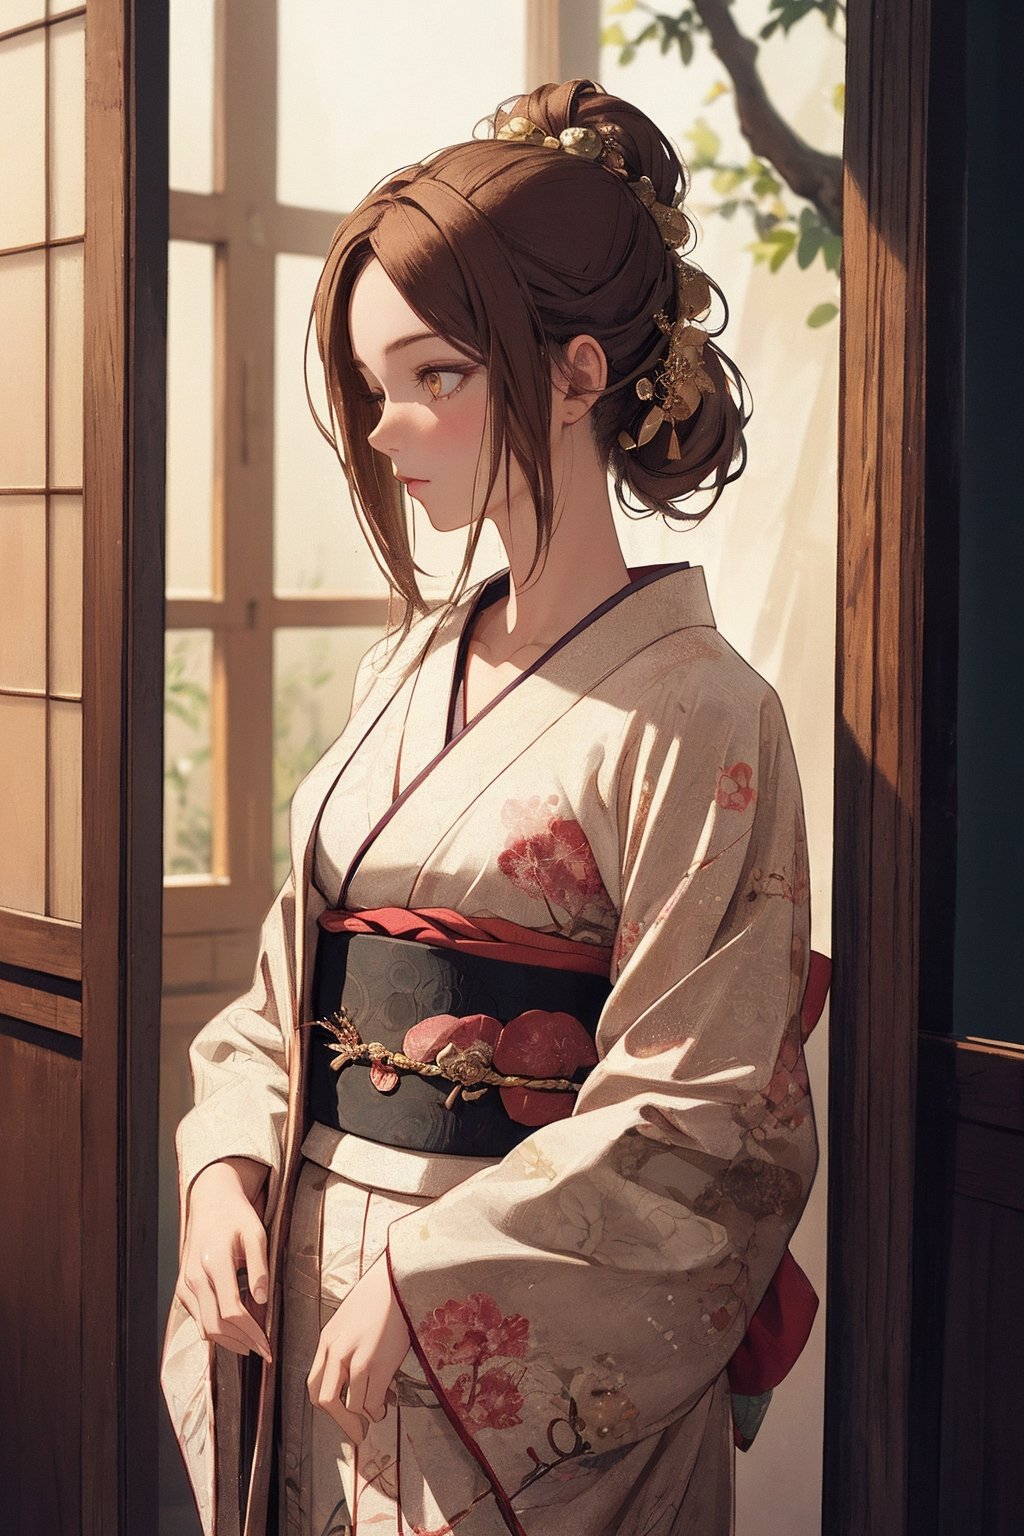 A Ultra realistic, a stunningly girl in (Pine and plum  pattern kimono:0.9), ornaments, flirting, filigree, colorful, sparkels, highlights, digital art, masterwork, brown hair, shrine, amber eyes, chignon, dark theme, soothing tones, muted colors, high contrast, (natural skin texture, hyperrealism, soft light, sharp)